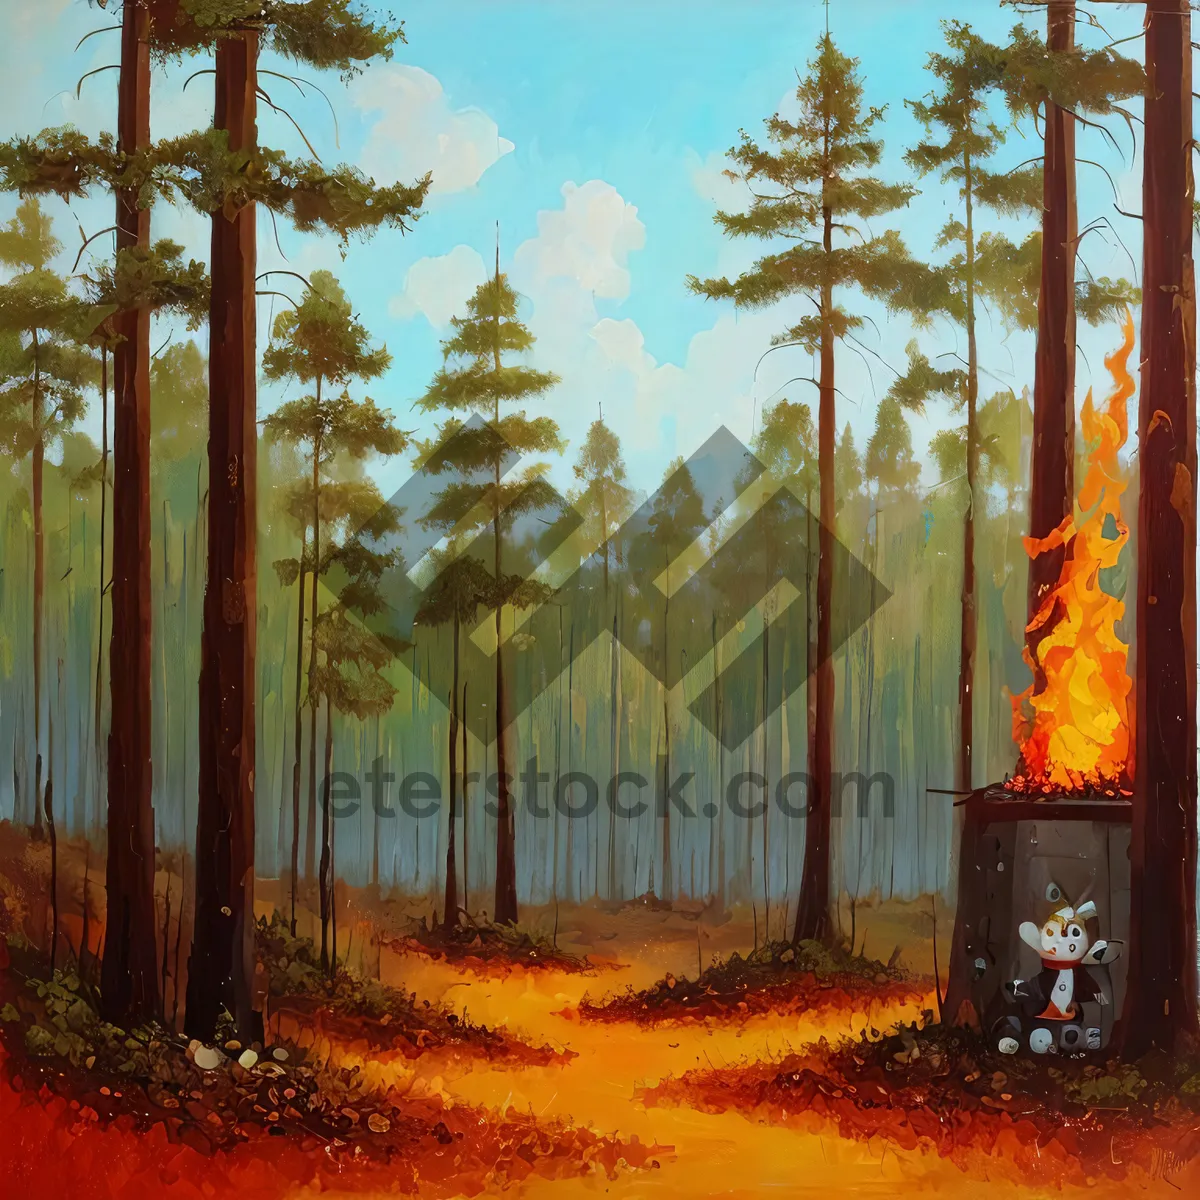 Picture of Serene Forest Landscape with Totem Pole in Sky